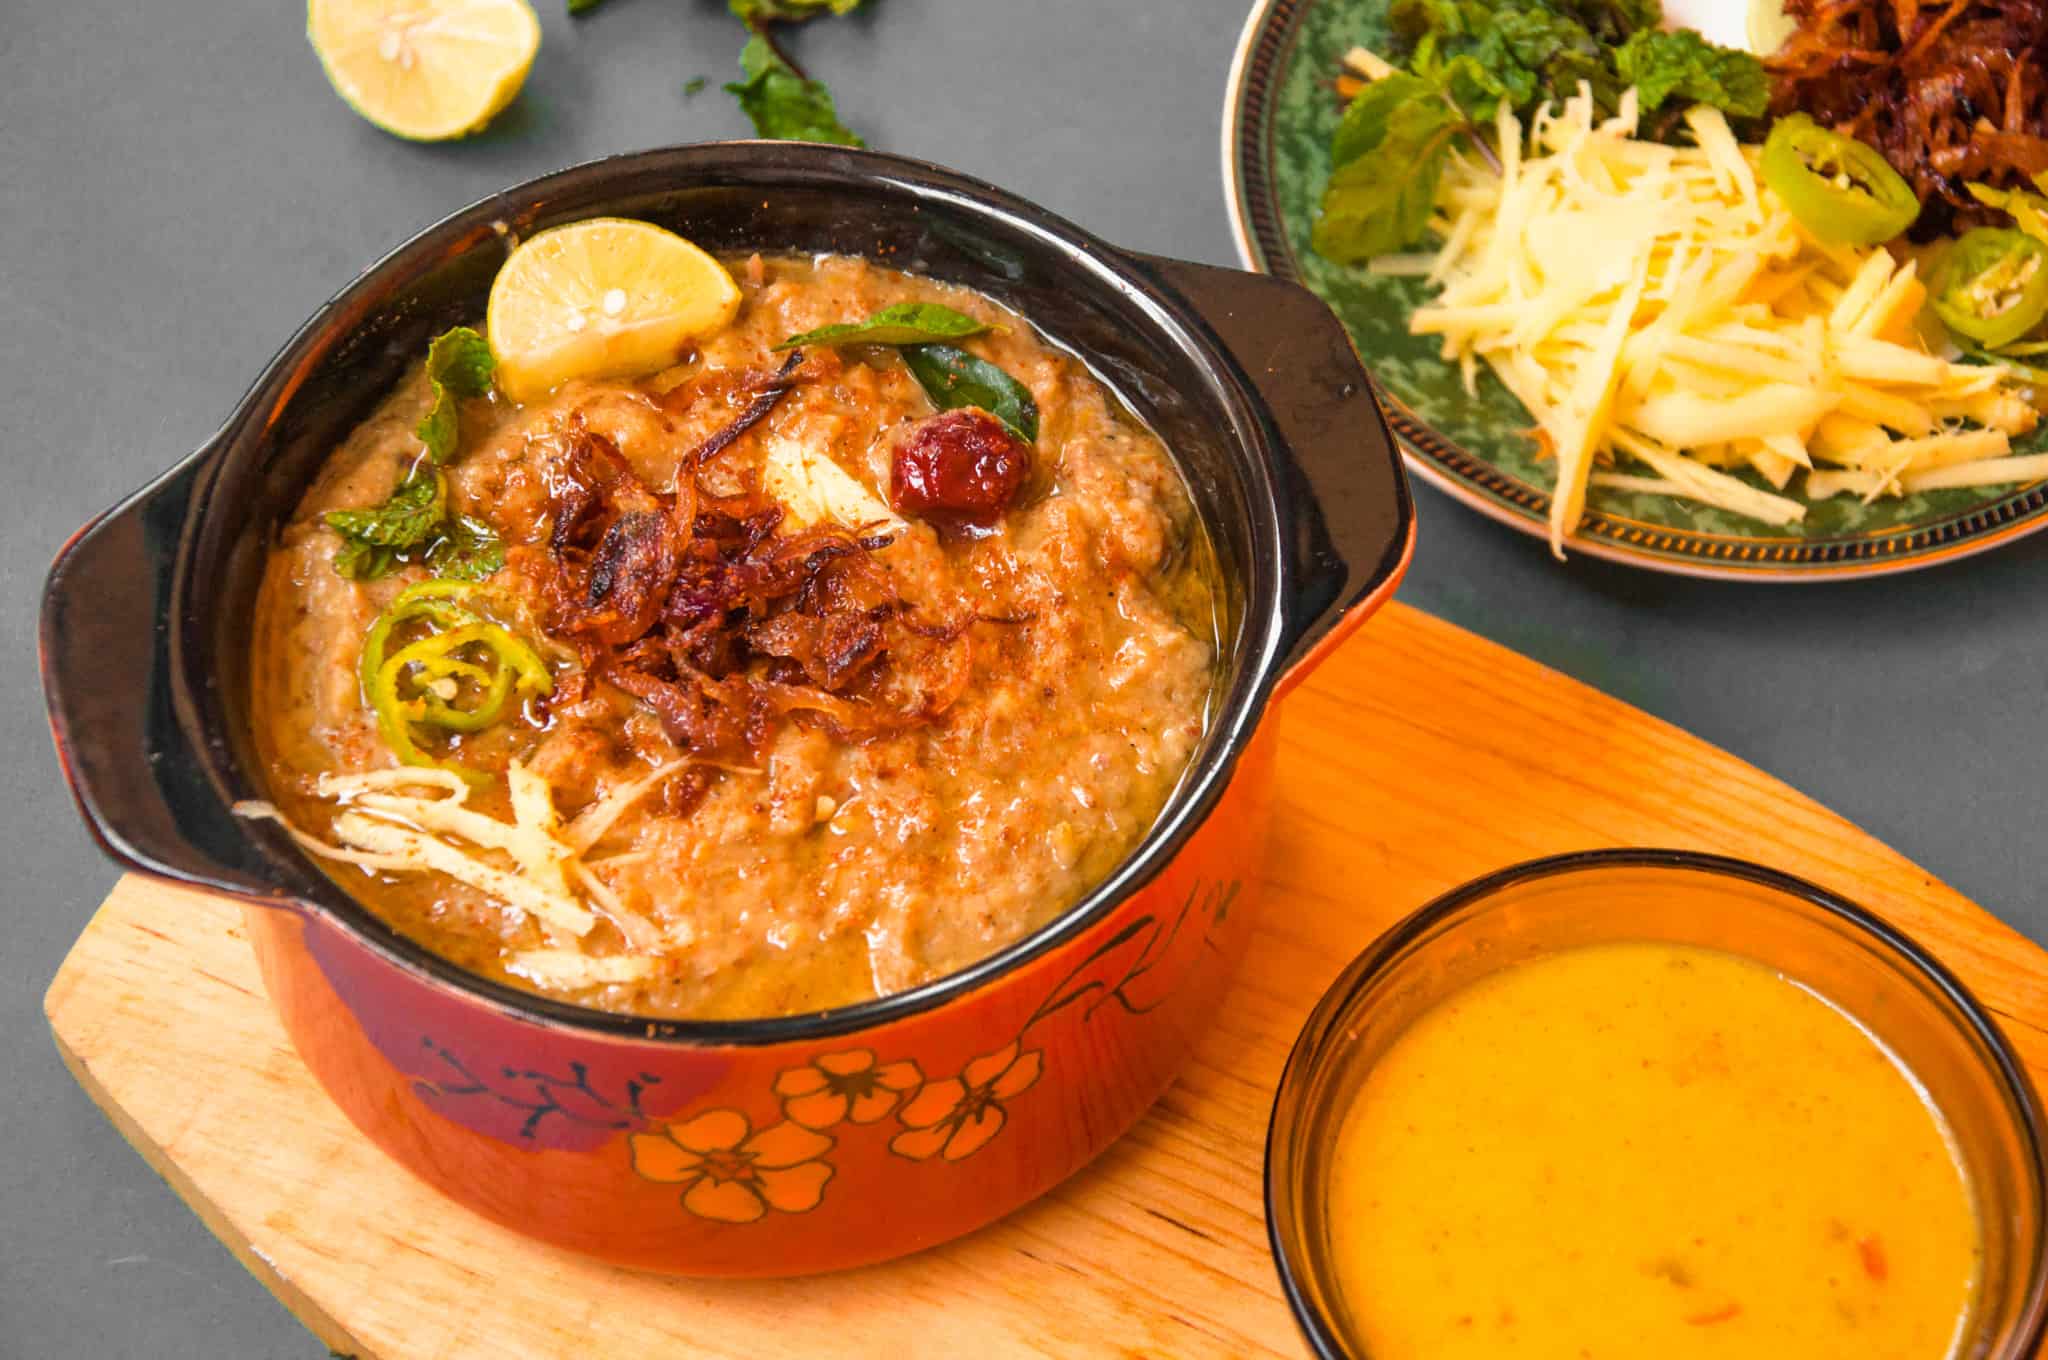 Haleem served with lemon wedges, kadhi, ginger, mint and fried onions.